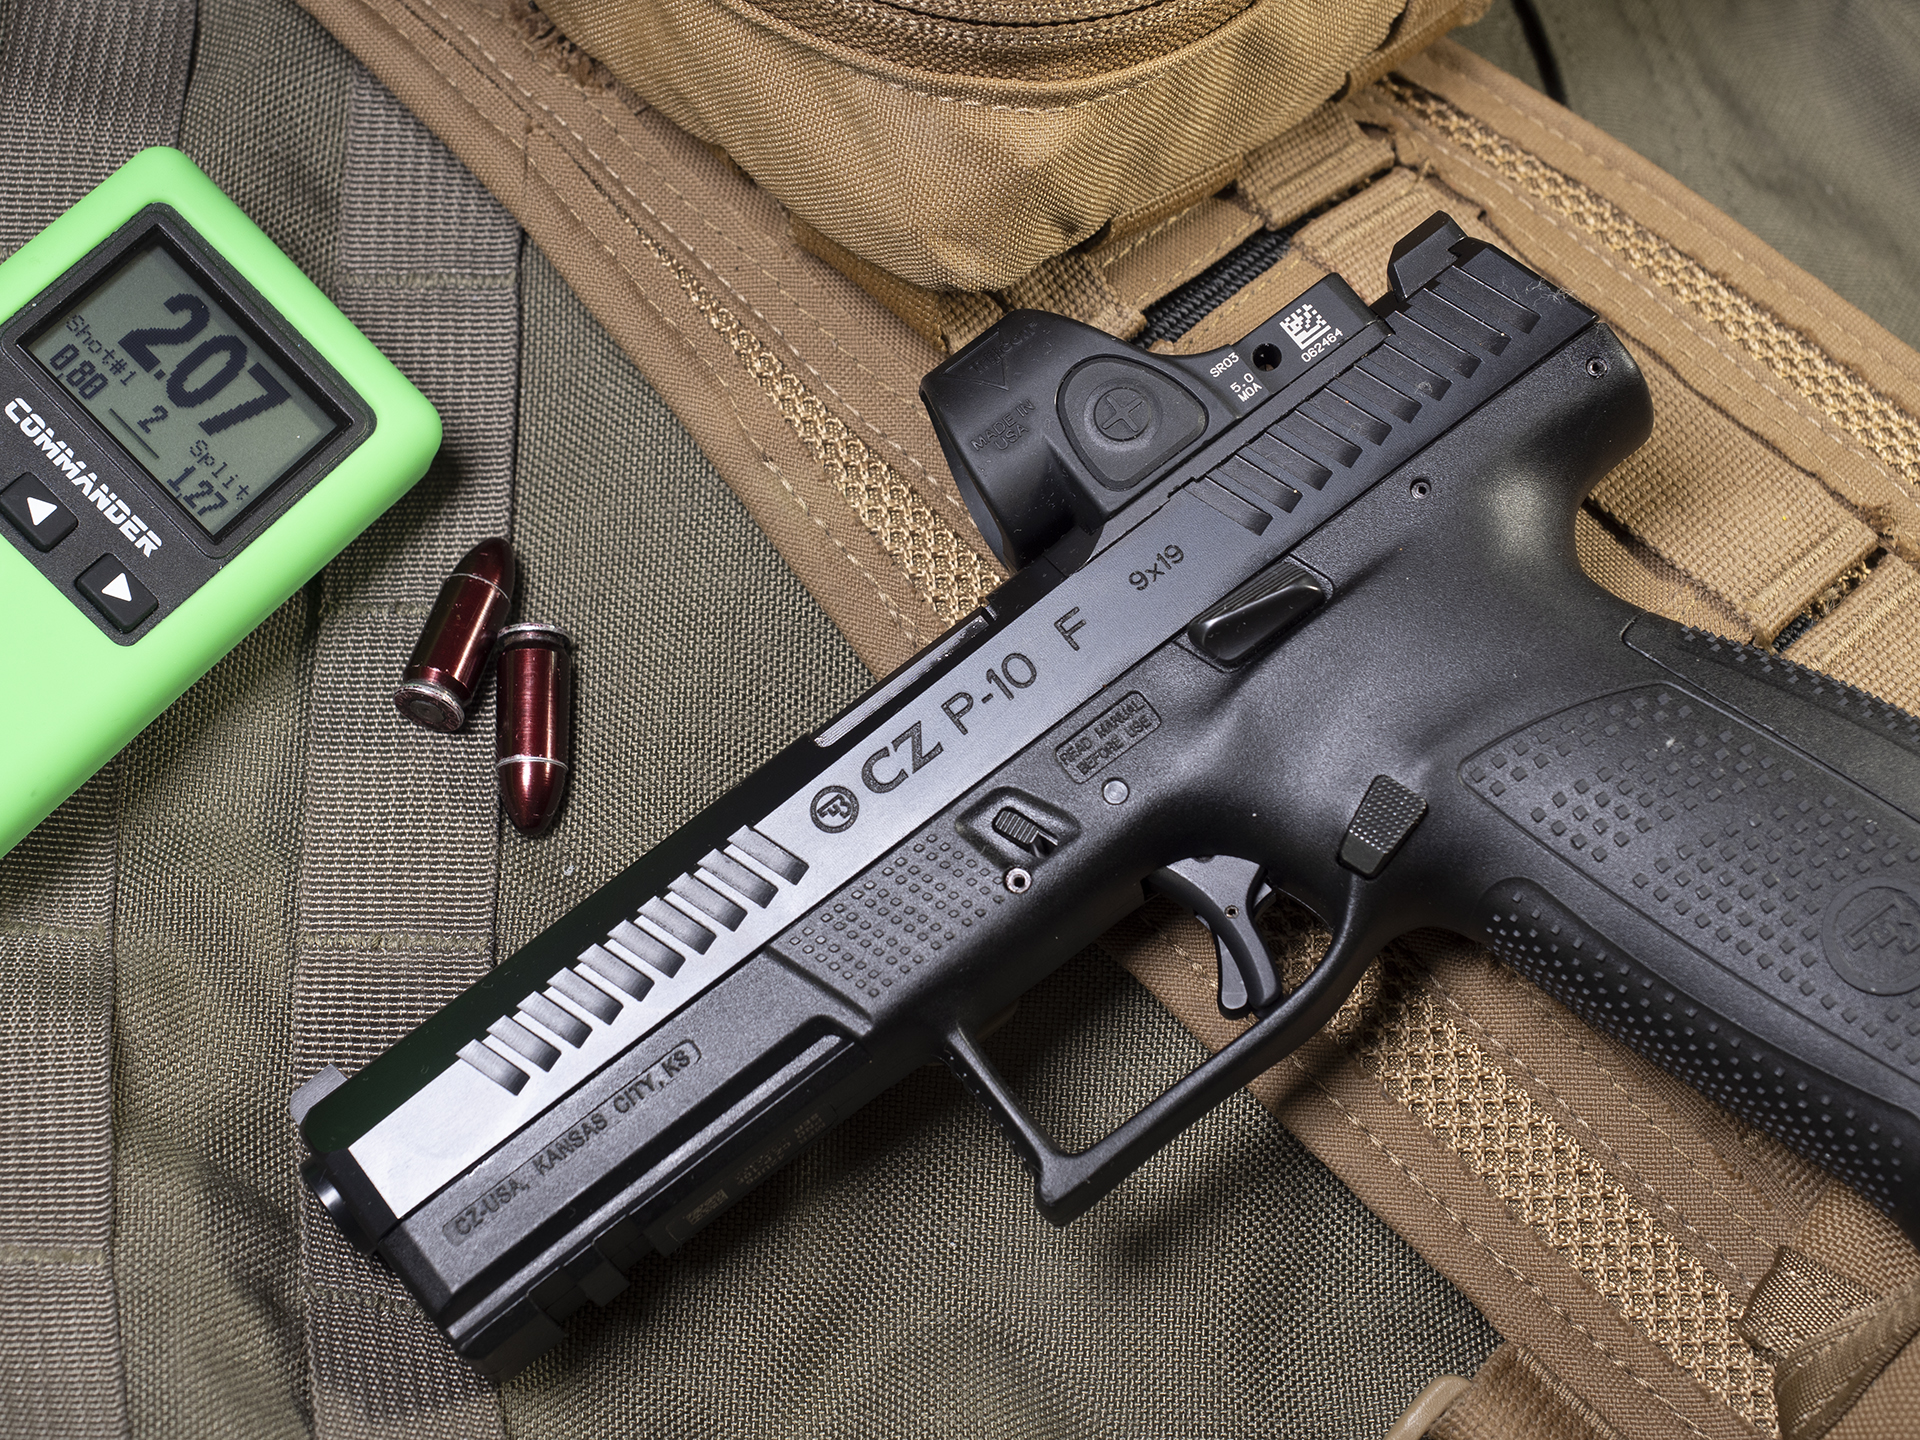 CZ P-10C with two 9 mm dummy round and a shot timer on top of green and tan gear.